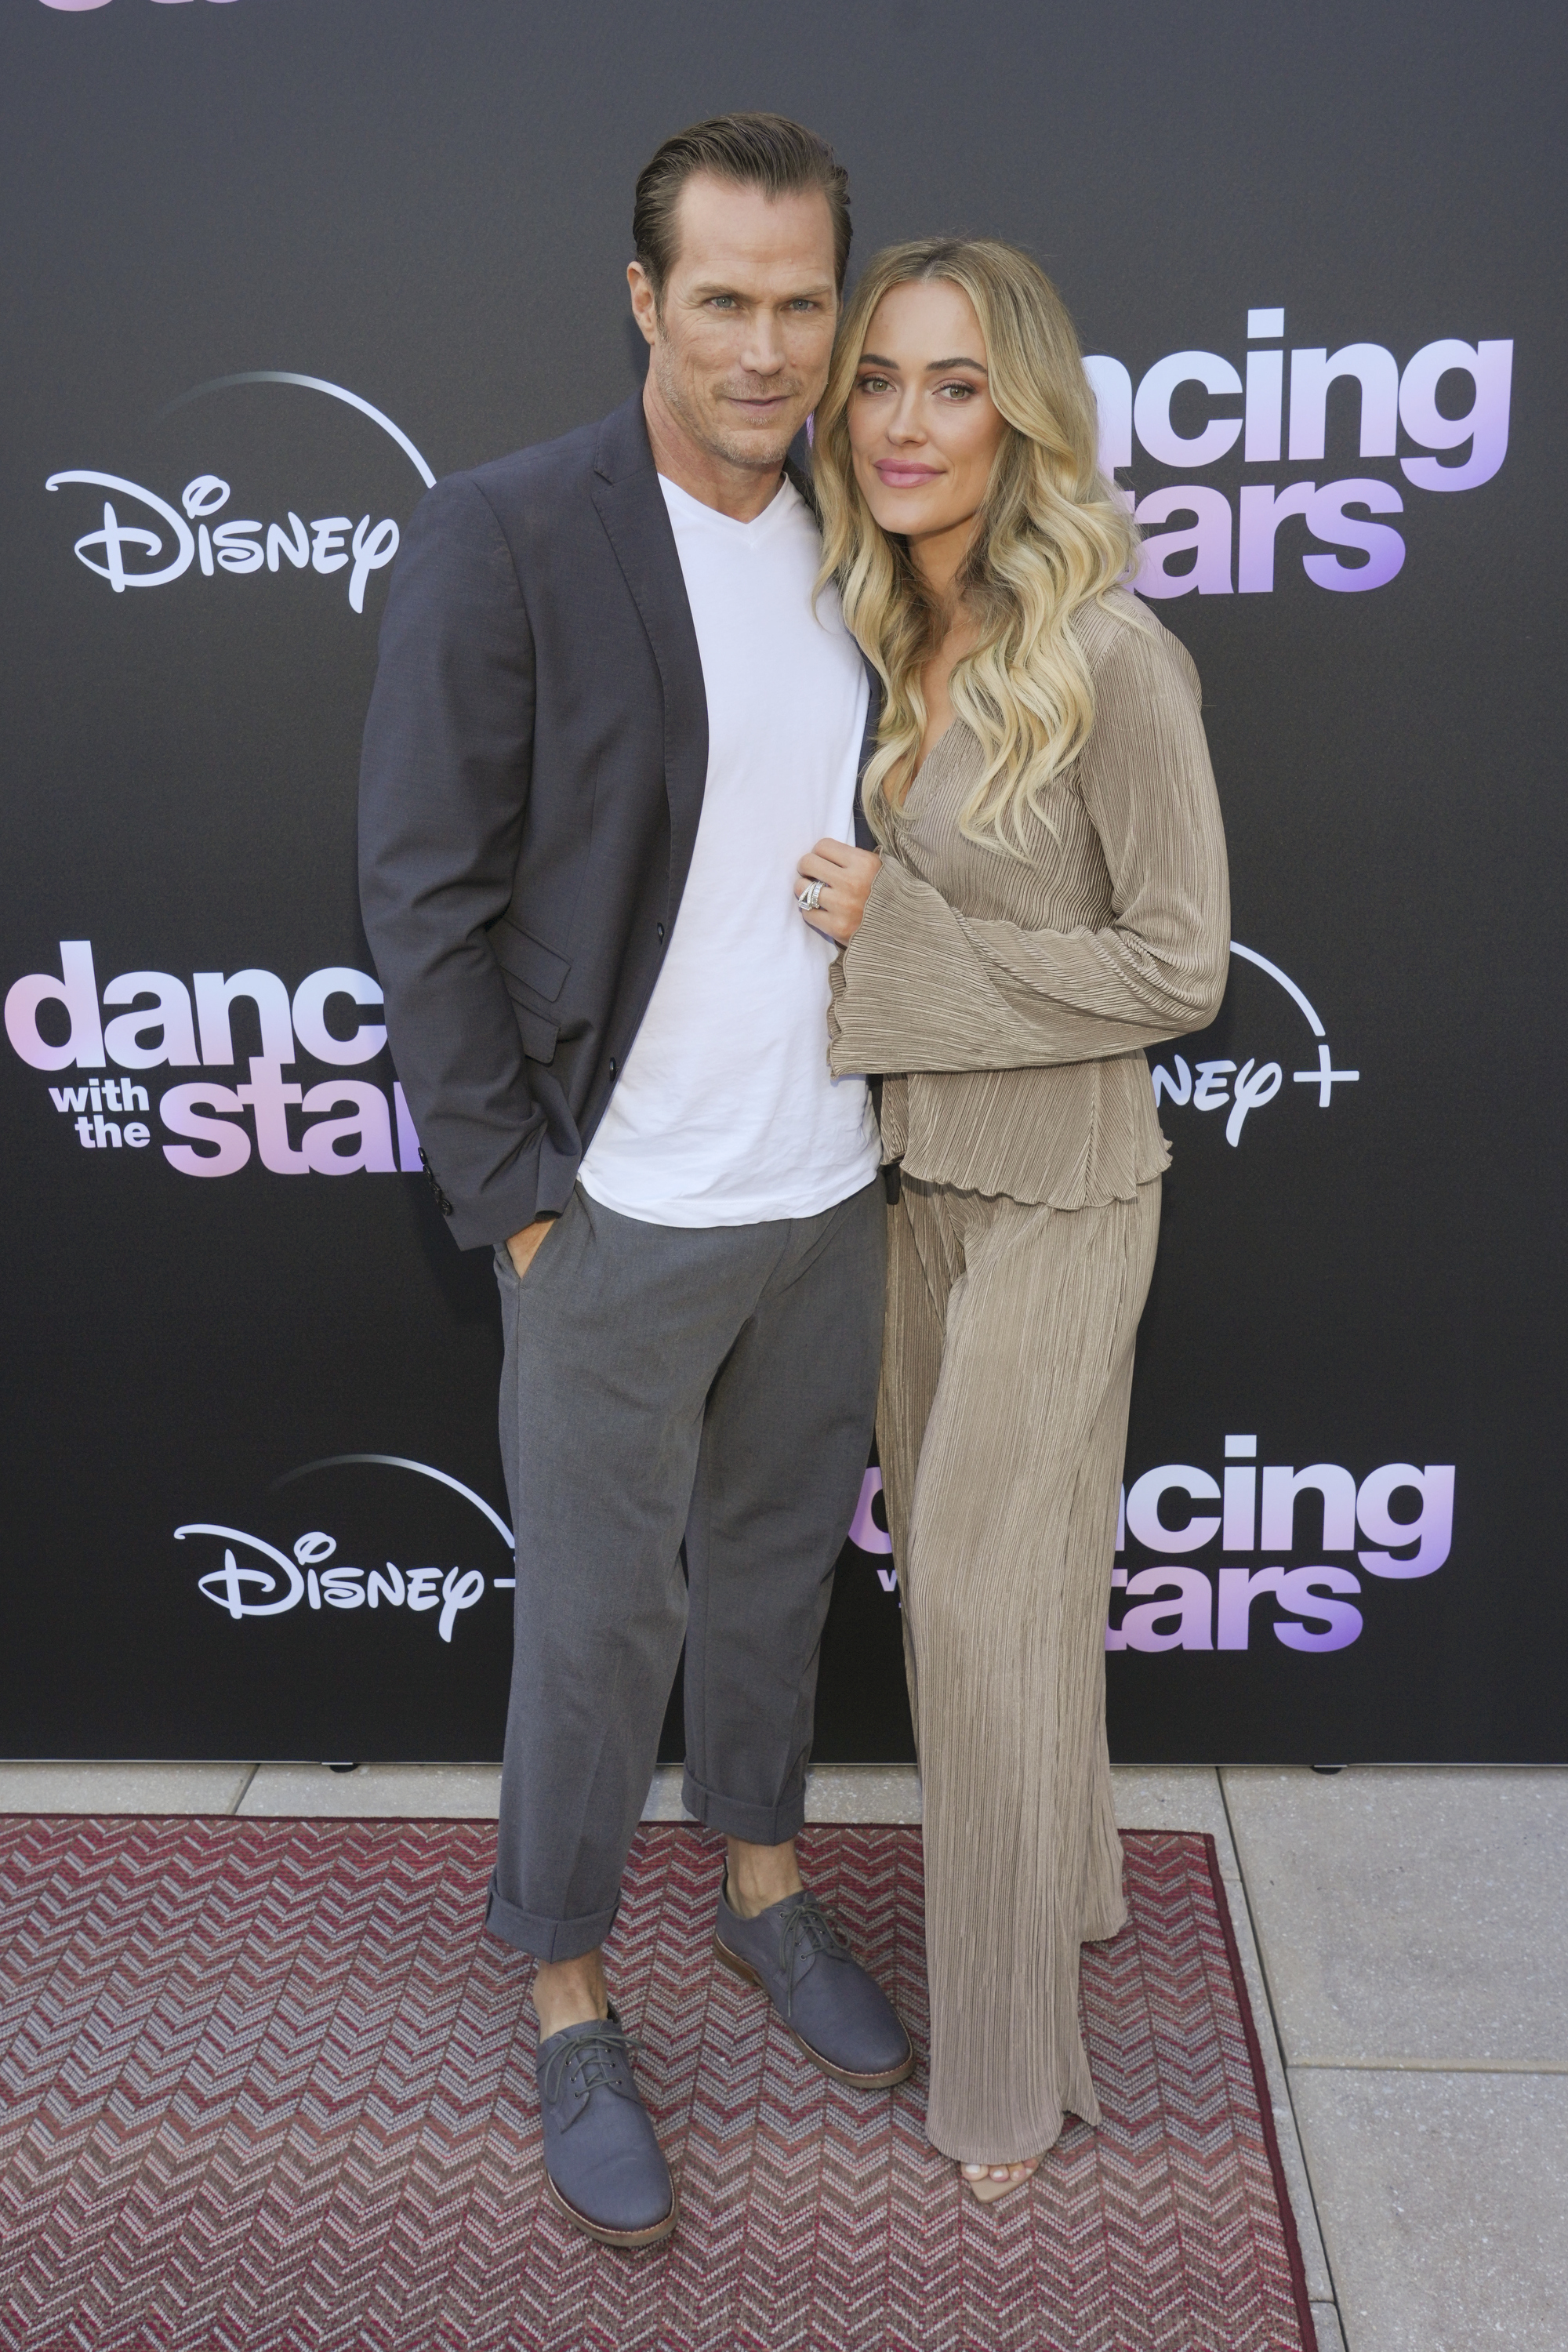 Jason Lewis' Fiancée Urged Him To Compete in Season 31 of DWTS